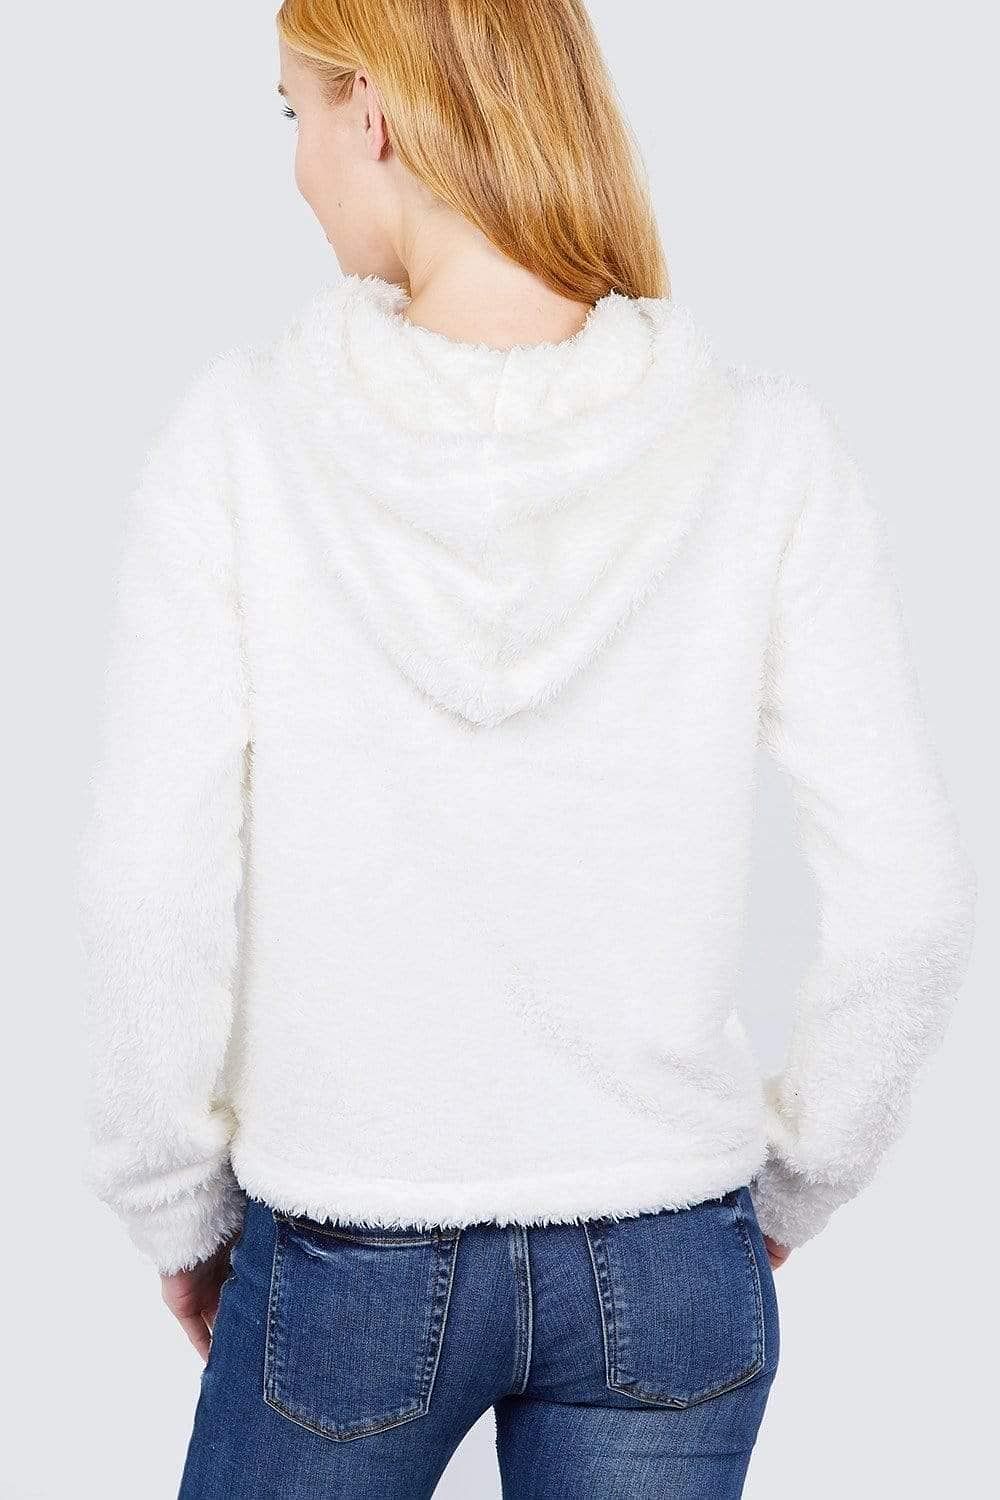 Ivory Long Sleeve Faux Fur Sweater - Shopping Therapy, LLC Top